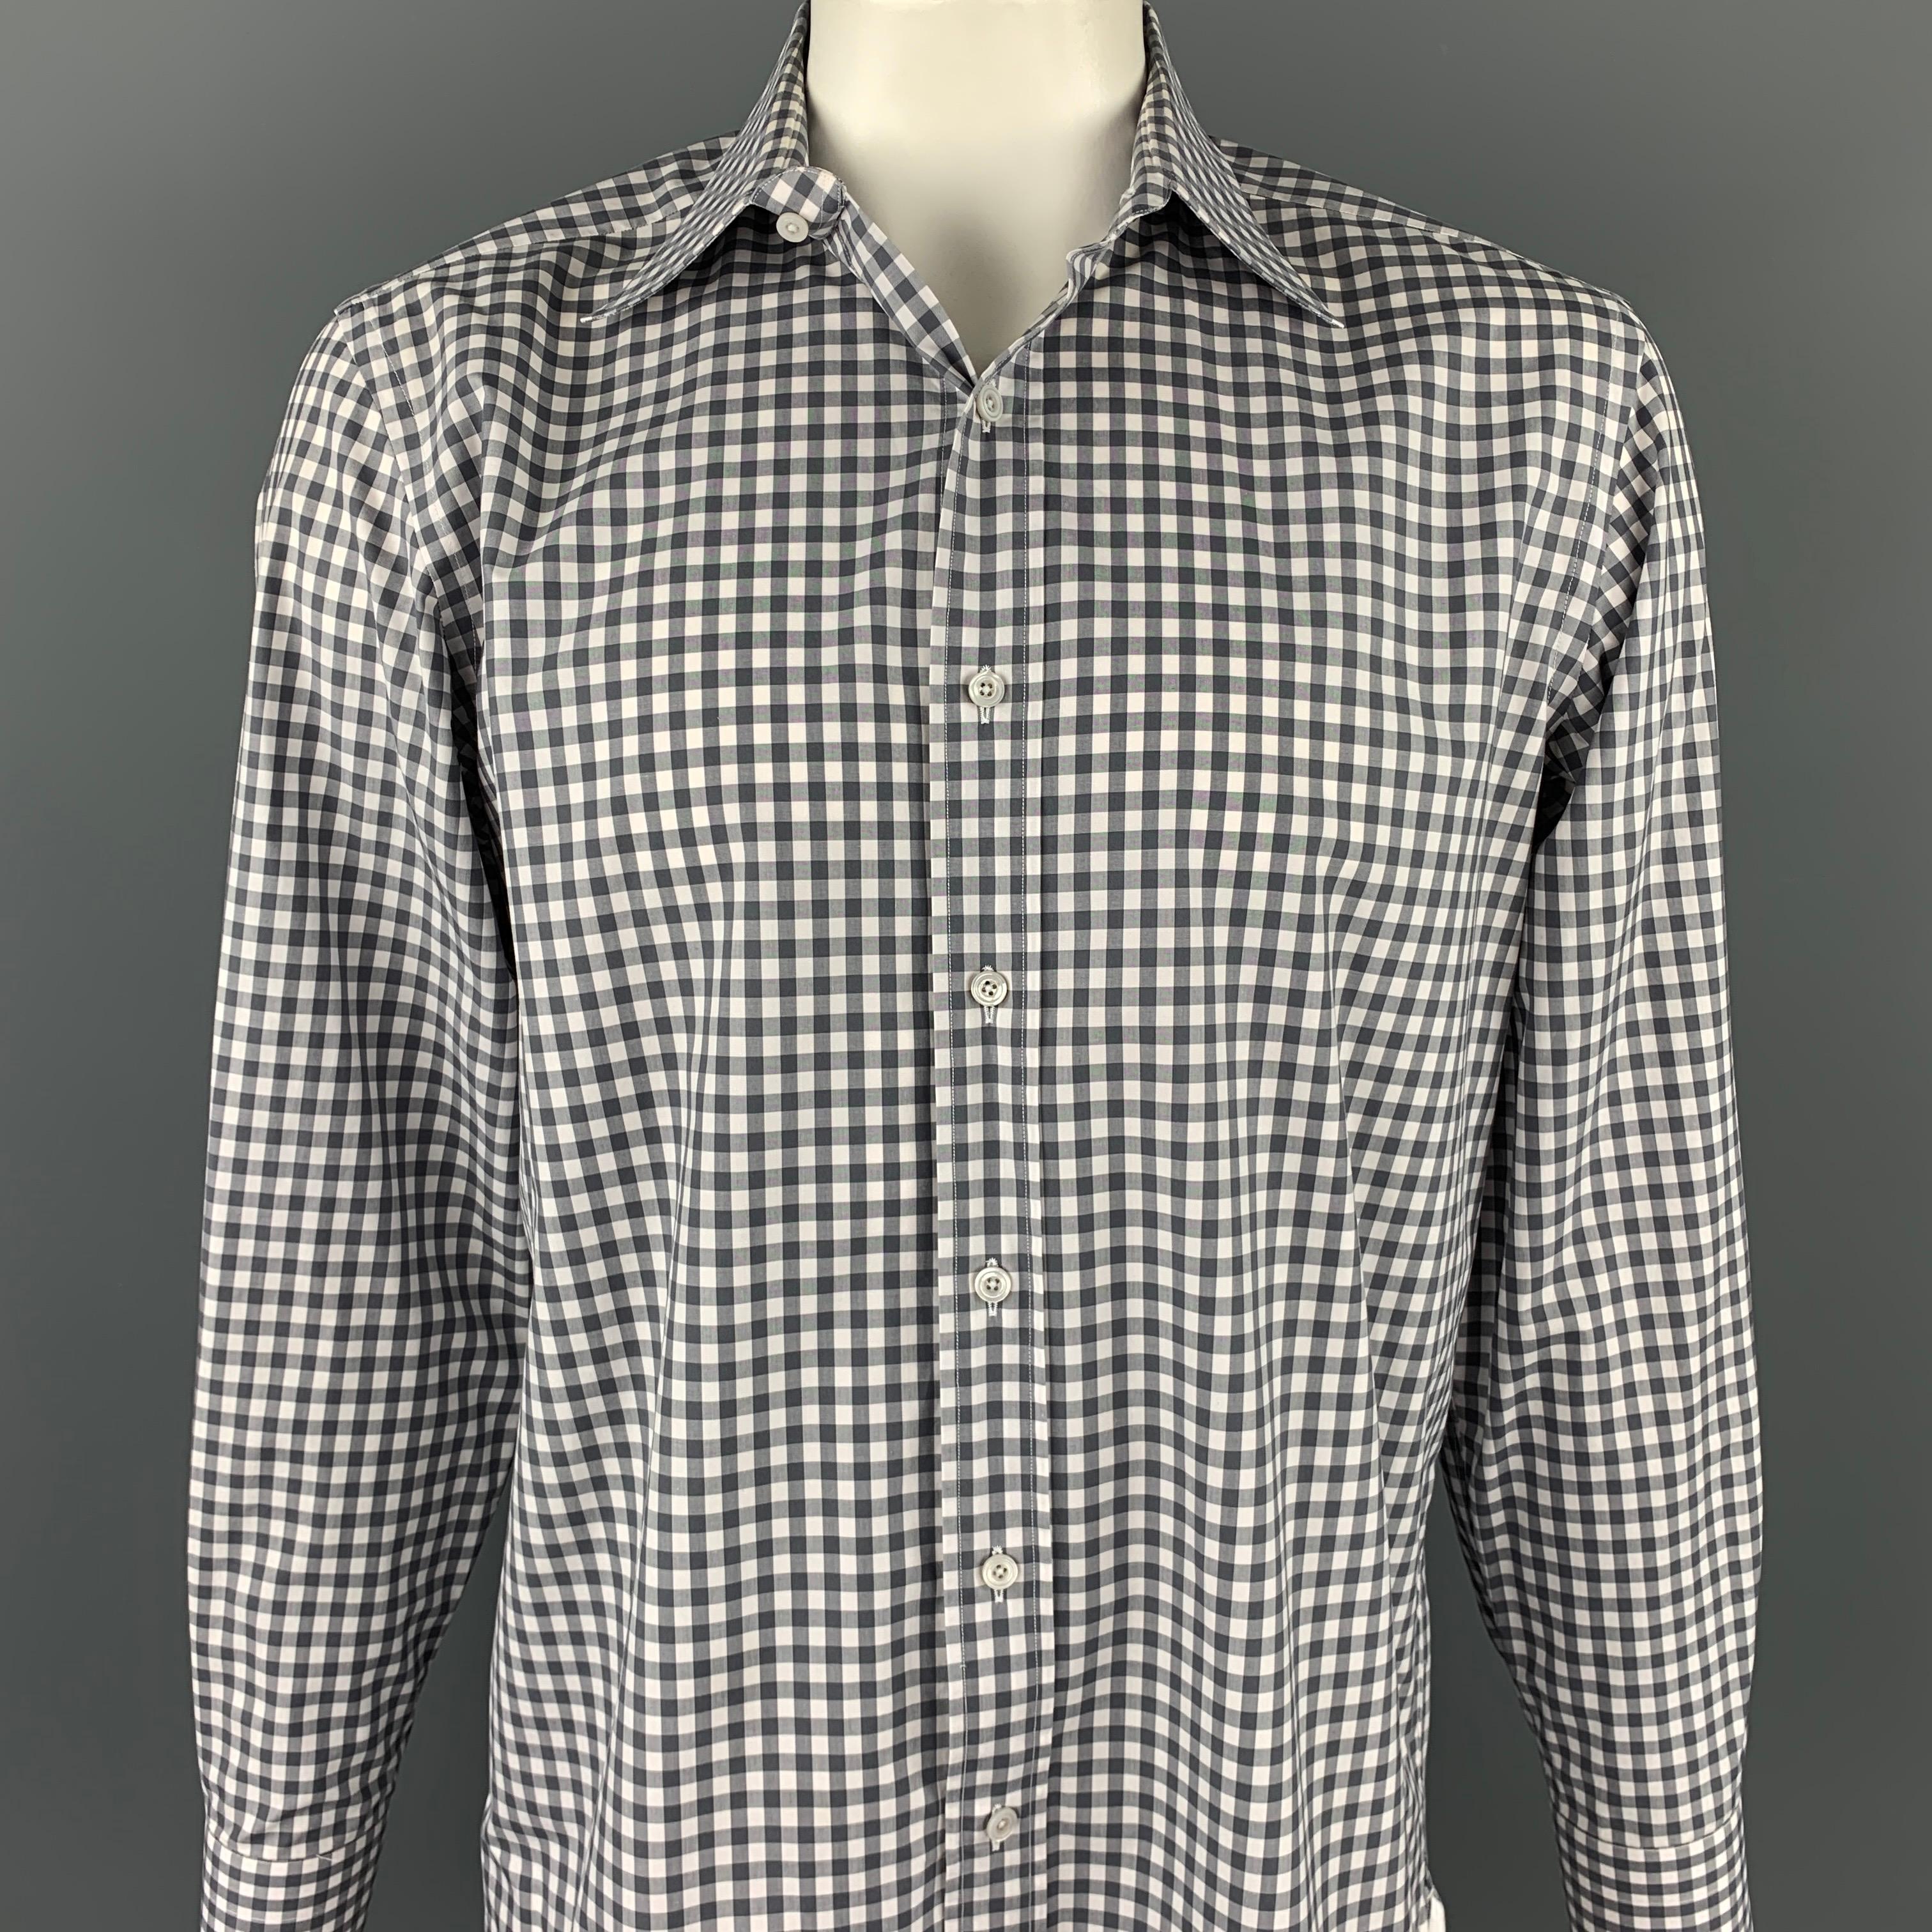 TOM FORD long sleeve shirt comes in a grey & white checkered cotton featuring a button up style and a spread collar. Made in Italy.

Very Good Pre-Owned Condition.
Marked: 43/17

Measurements:

Shoulder: 19 in.
Chest: 48 in.
Sleeve: 27 in.
Length: